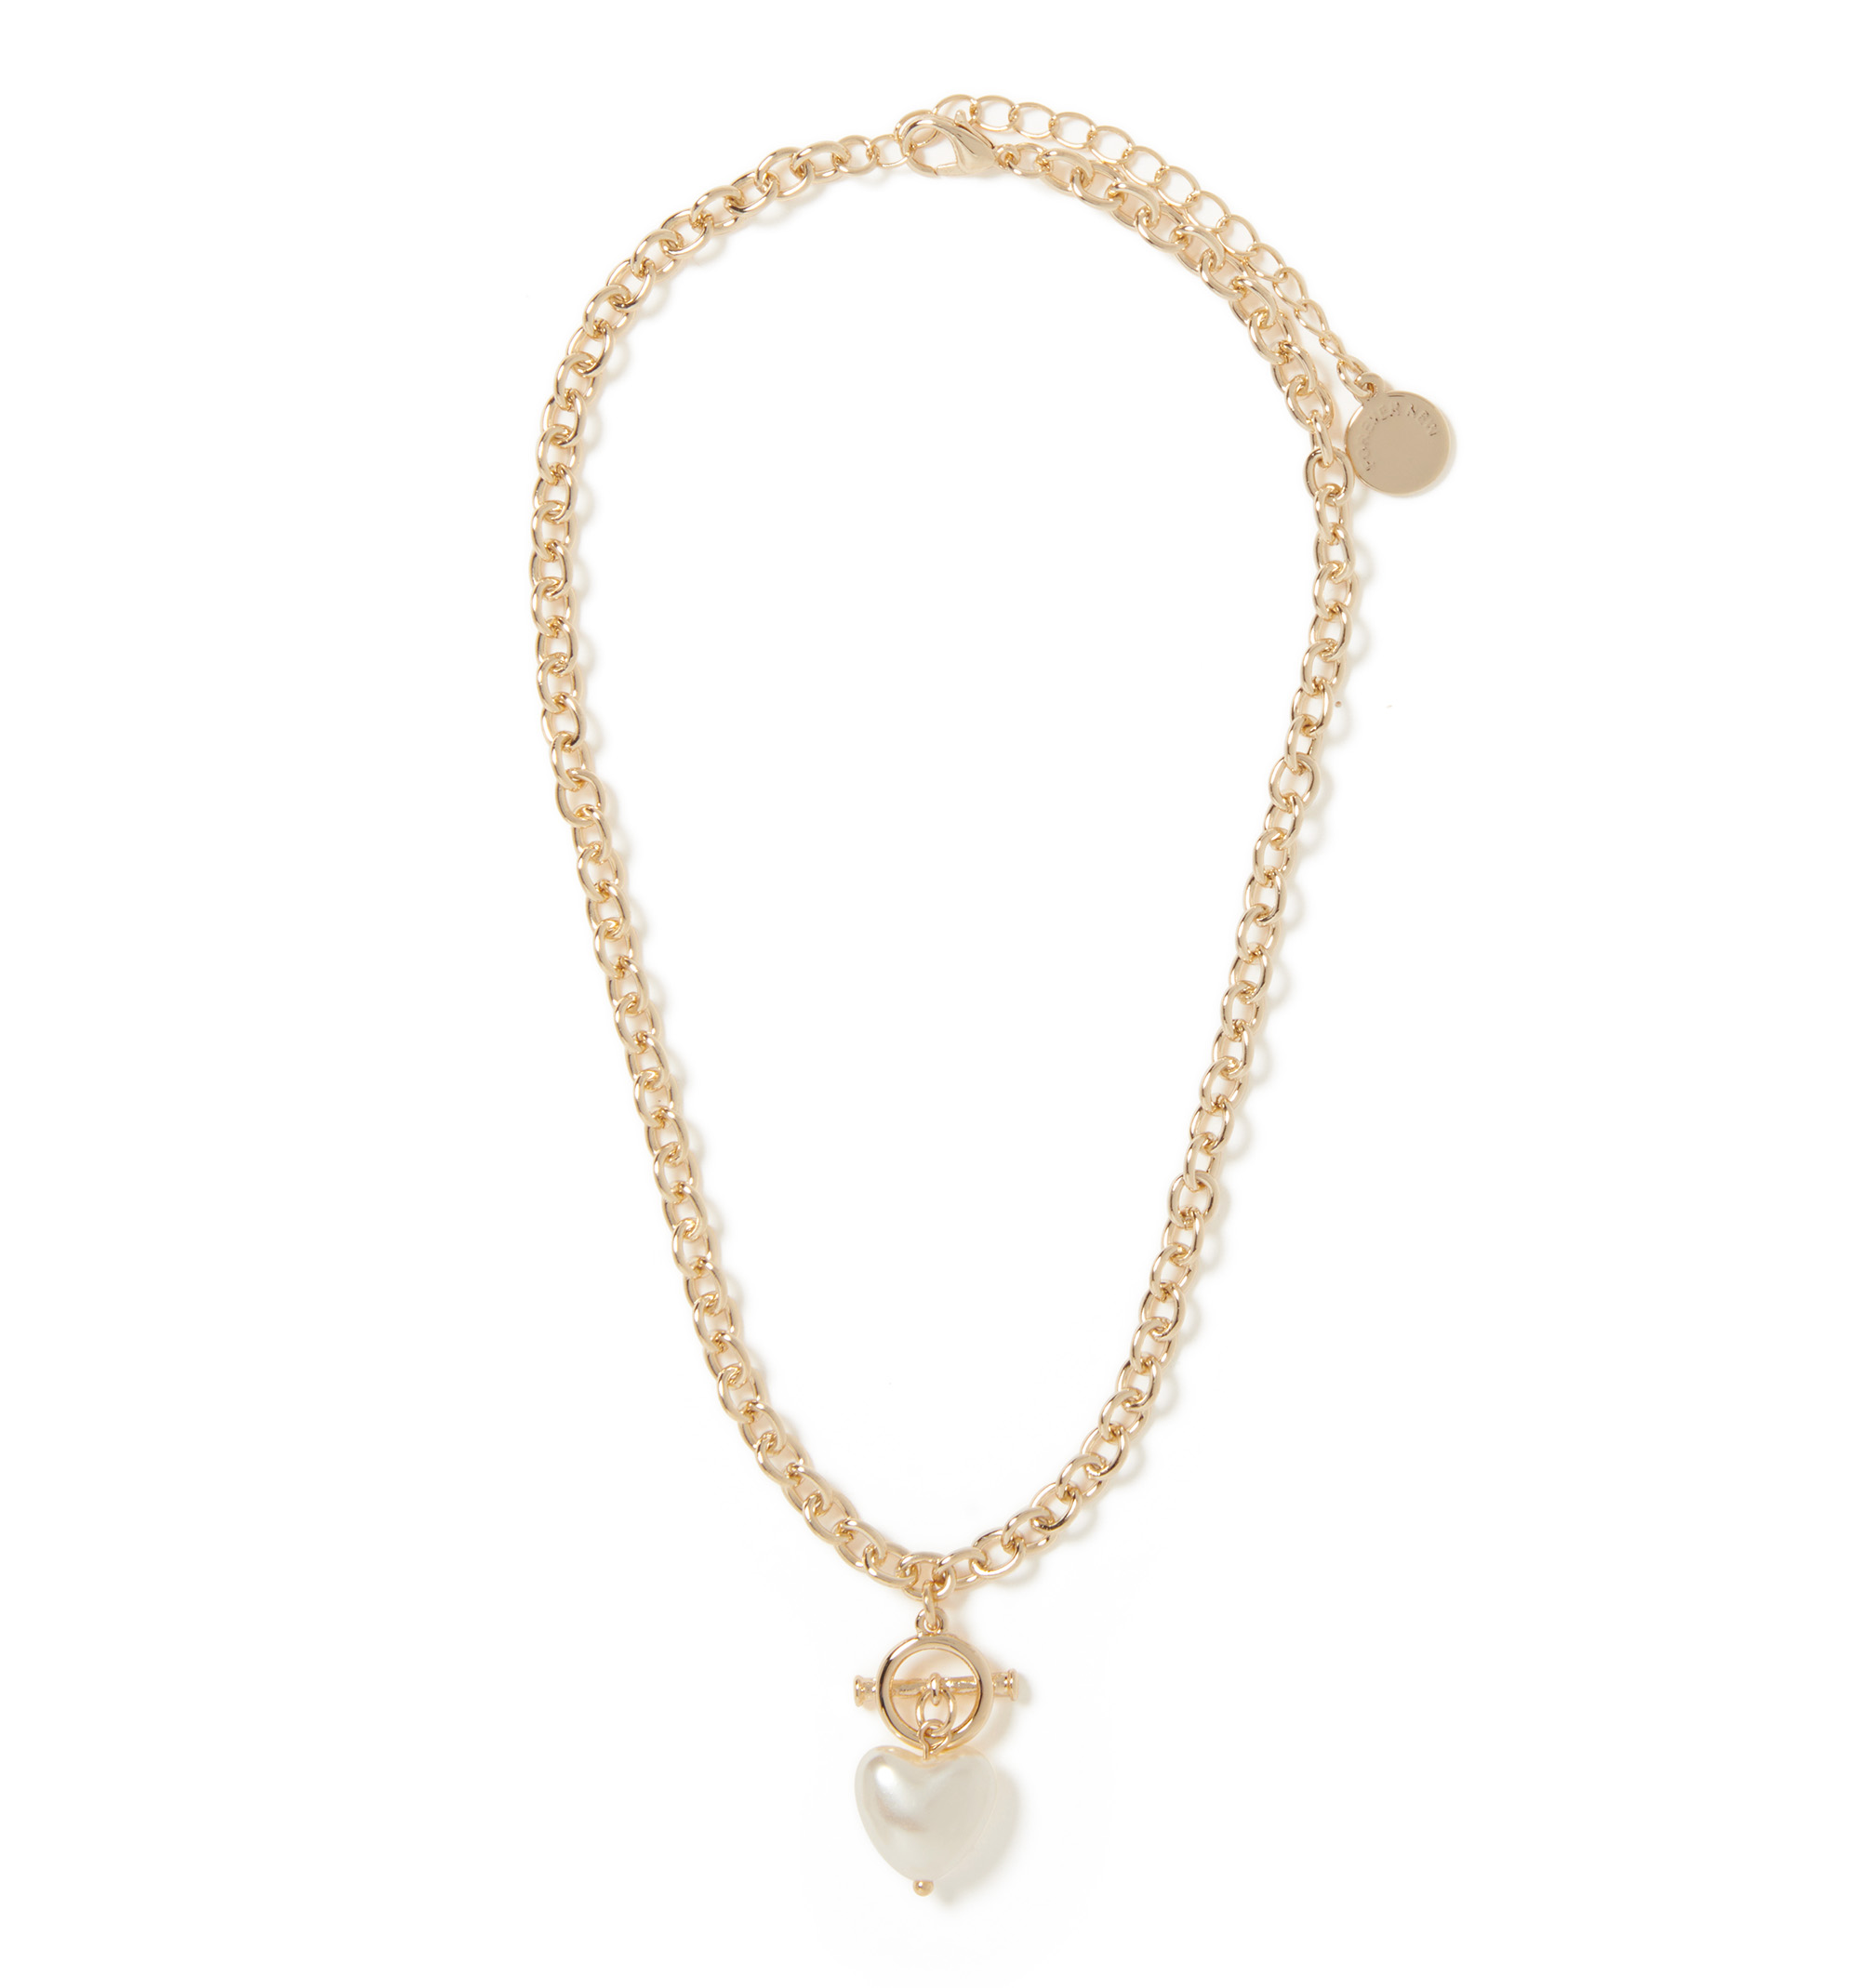 Floating pearl necklace | Wedding Jewelry |Summer Gems